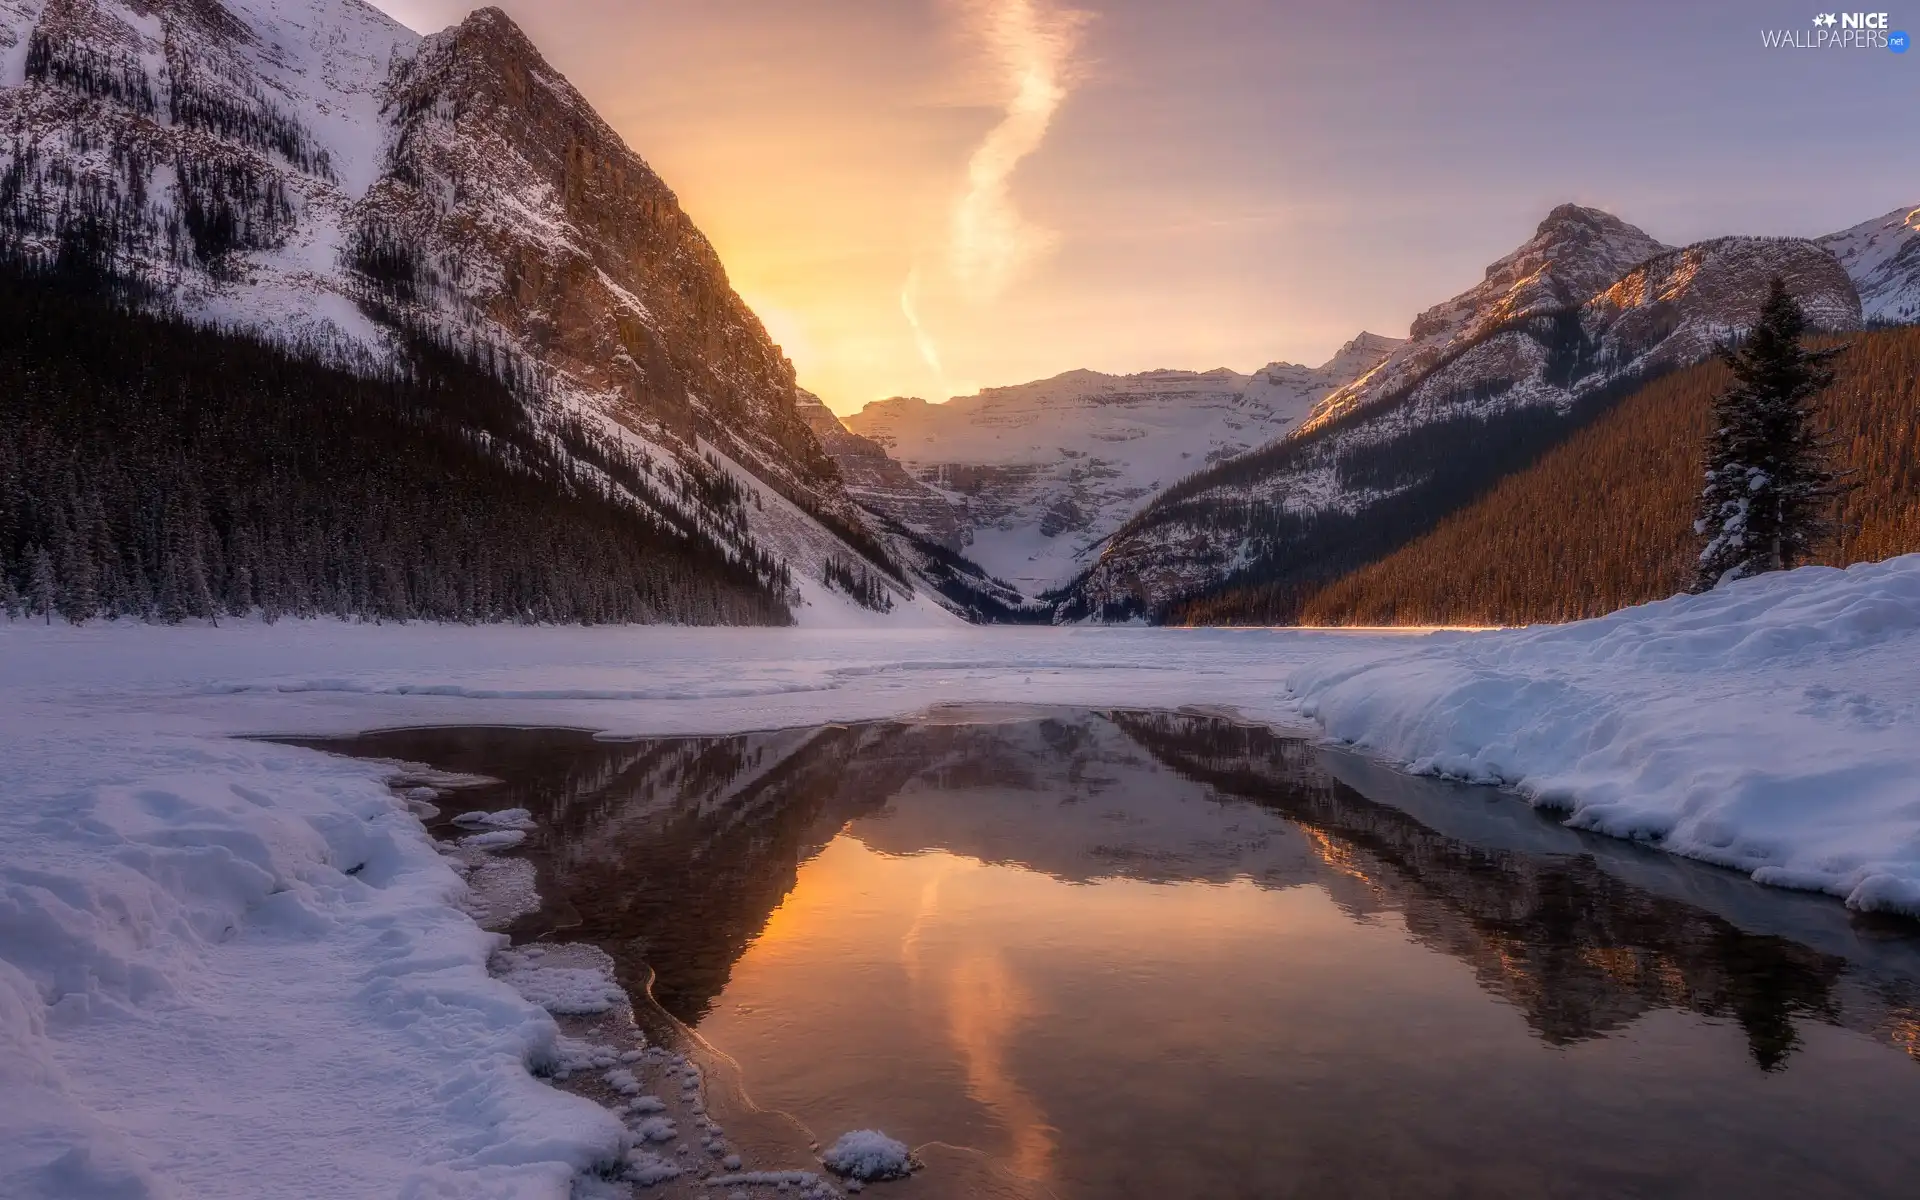 Mountains, winter, trees, forest, Sunrise, Canada, Alberta, Lake Louise, lake, Banff National Park, viewes